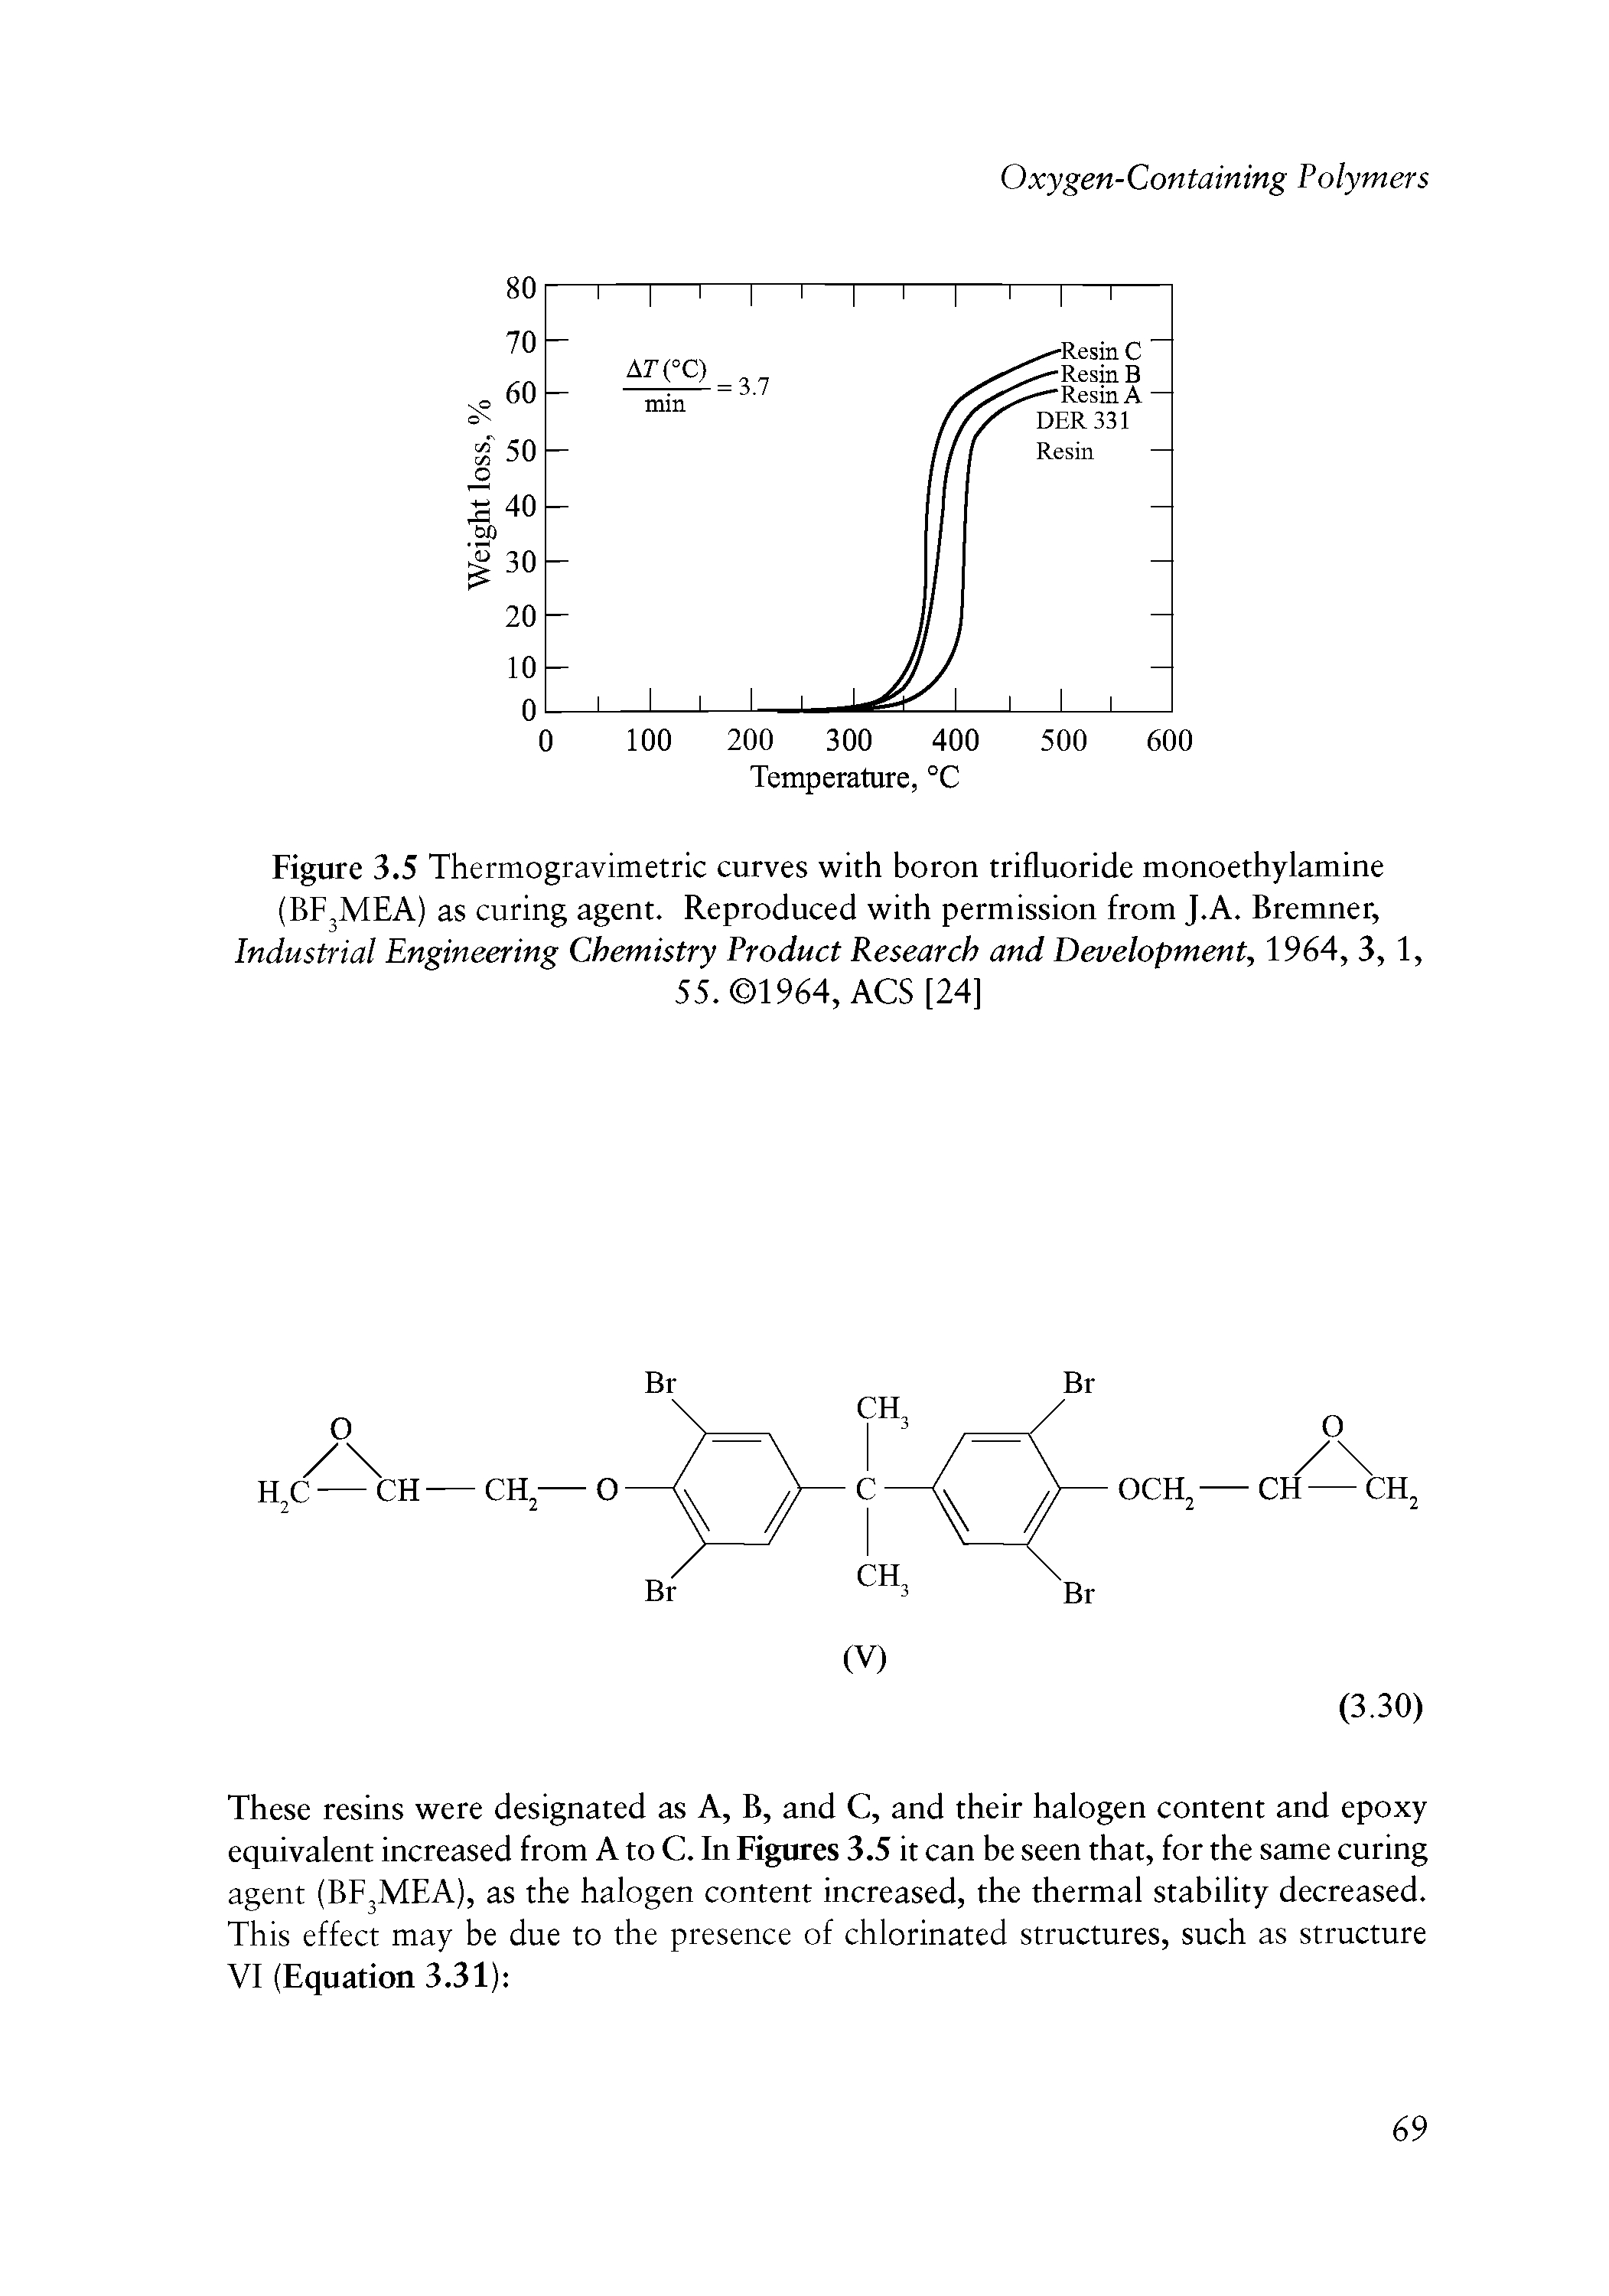 Figure 3.5 Thermogravimetric curves with boron trifluoride monoethylamine (BF3MEA) as curing agent. Reproduced with permission from J.A. Bremner, Industrial Engineering Chemistry Product Research and Development, 1964, 3, 1,...